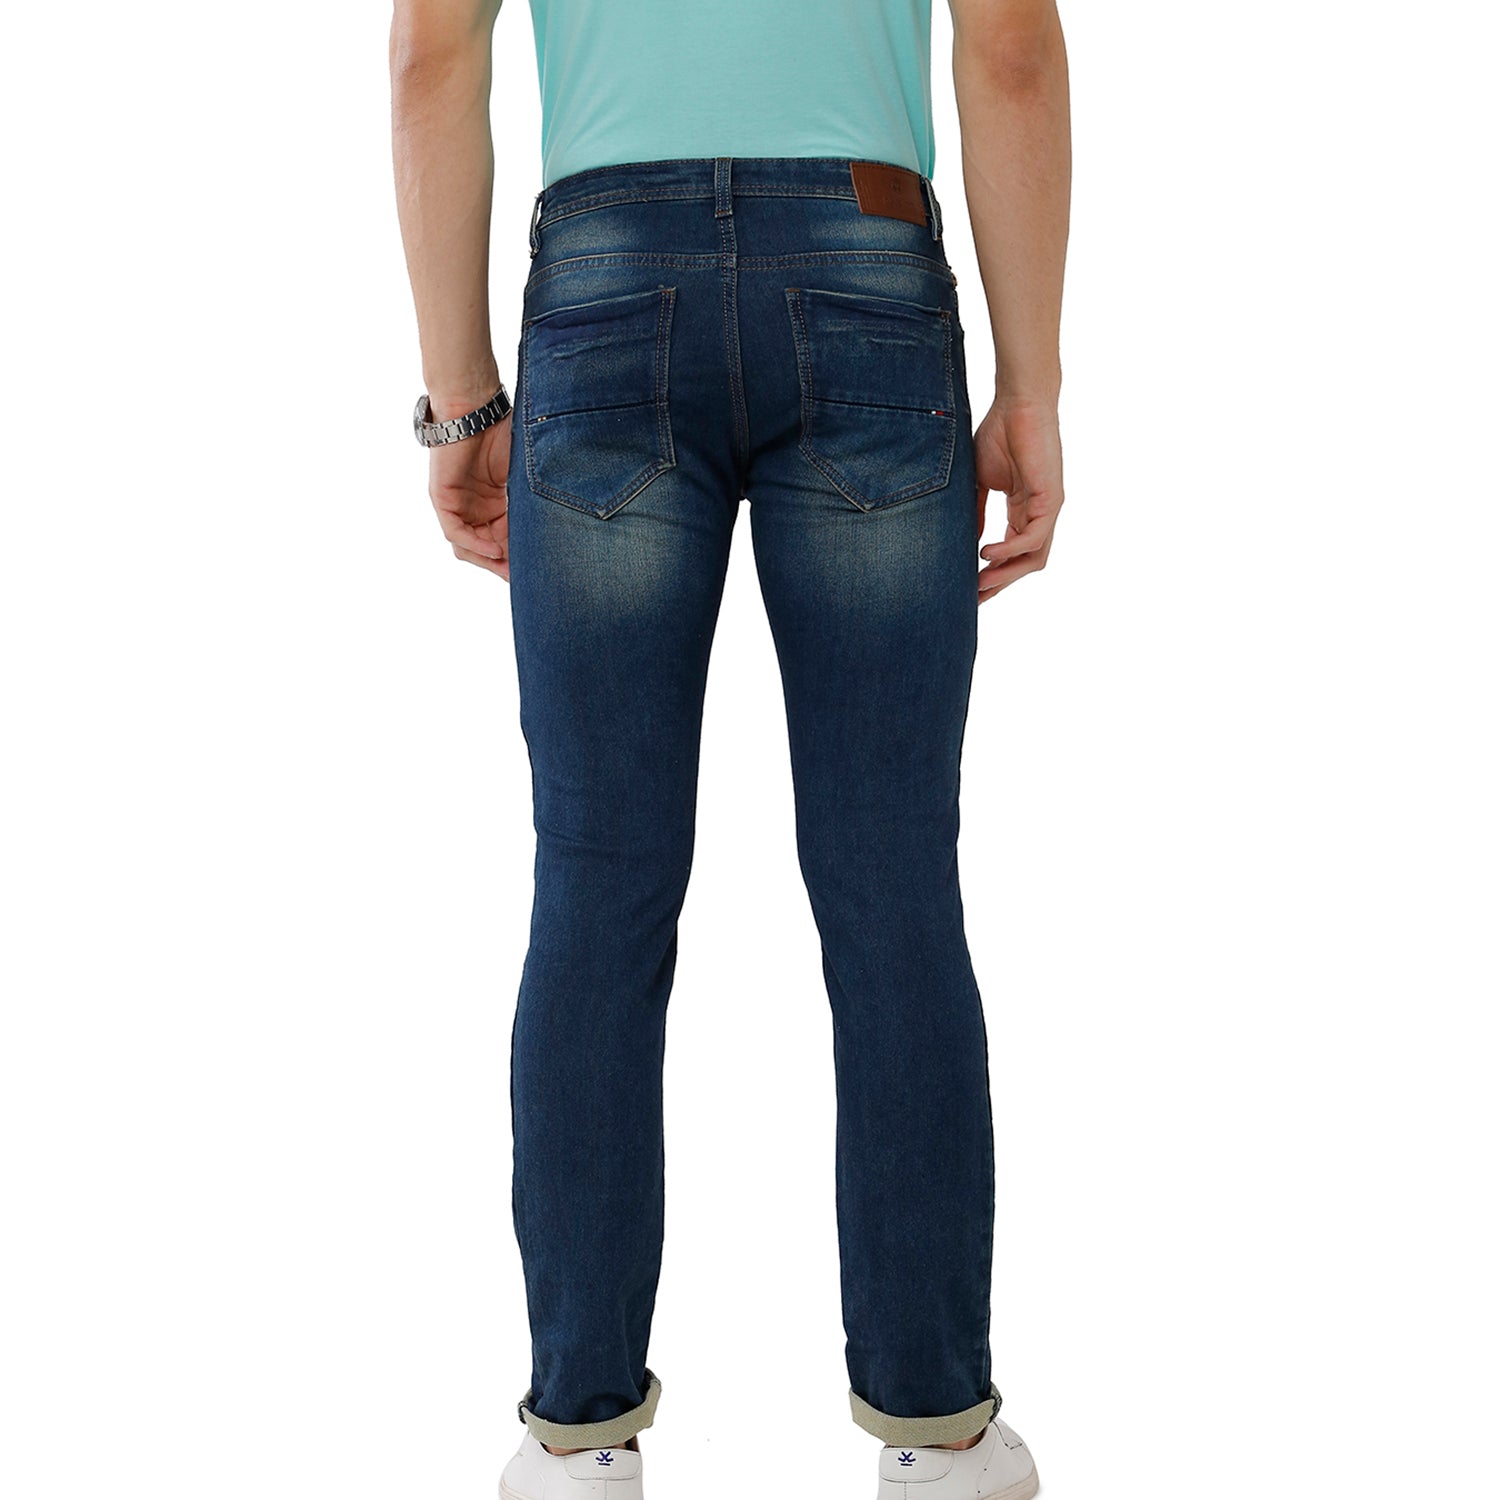 Sweeten Up 2022 With A Pair Of Sugar Cane's 14 oz. 1966 Raw Denim Jeans